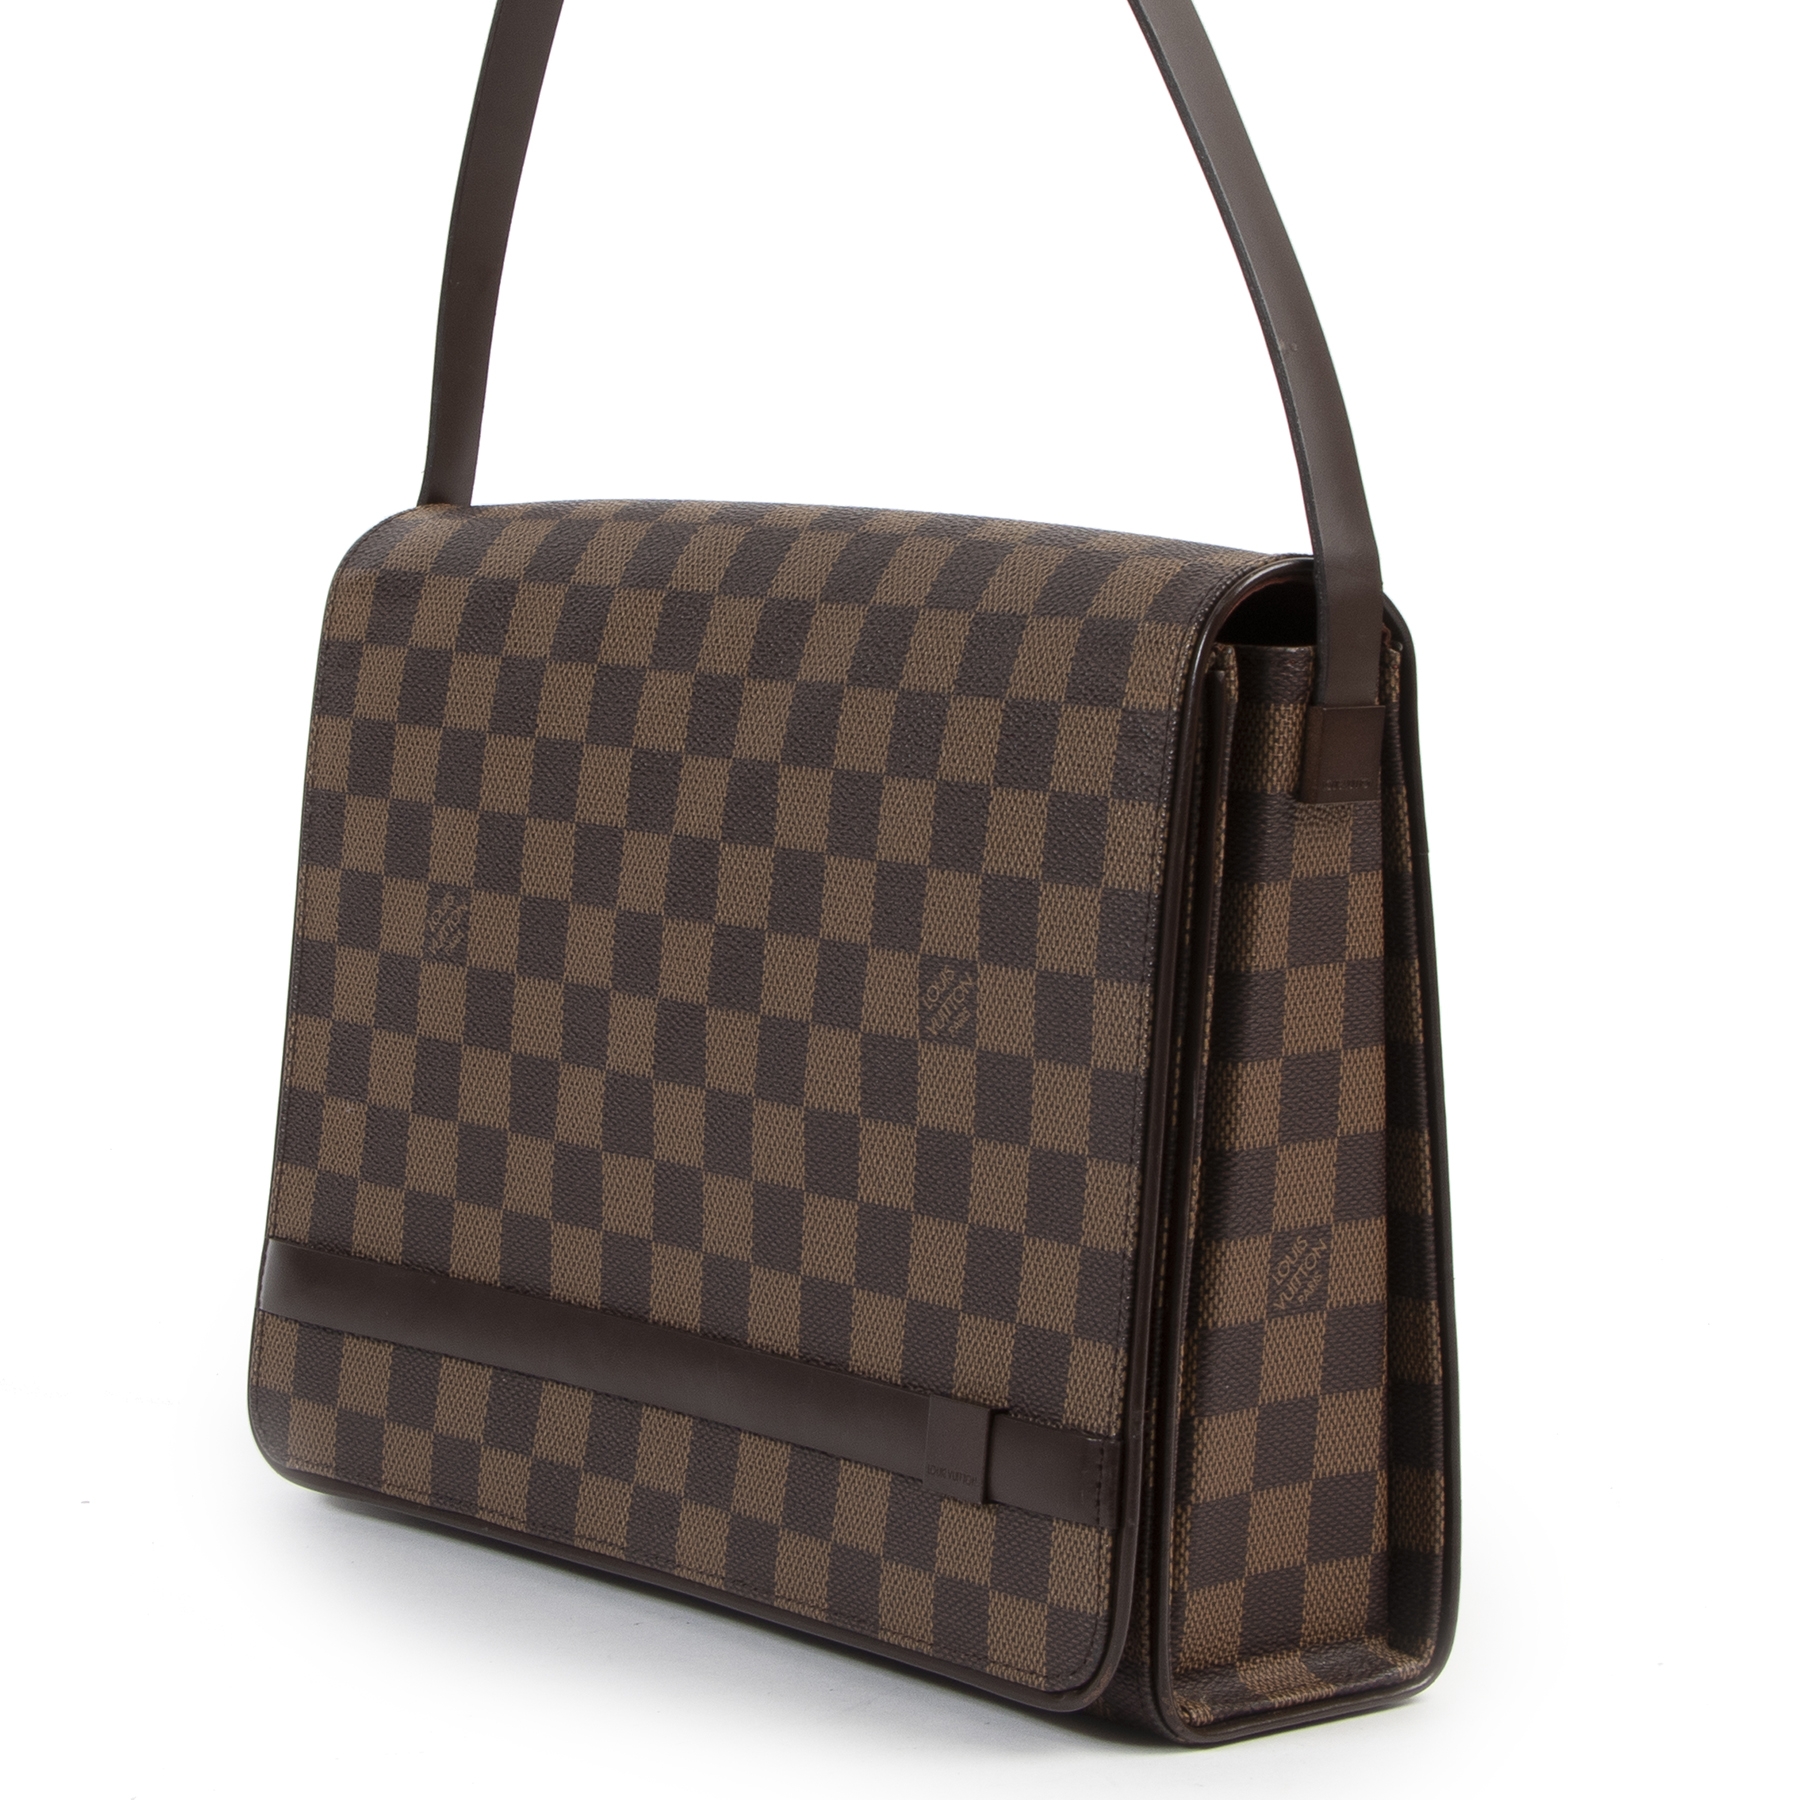 Shop for Louis Vuitton Damier Ebene Canvas Leather Tribeca Long Shoulder Bag  - Shipped from USA